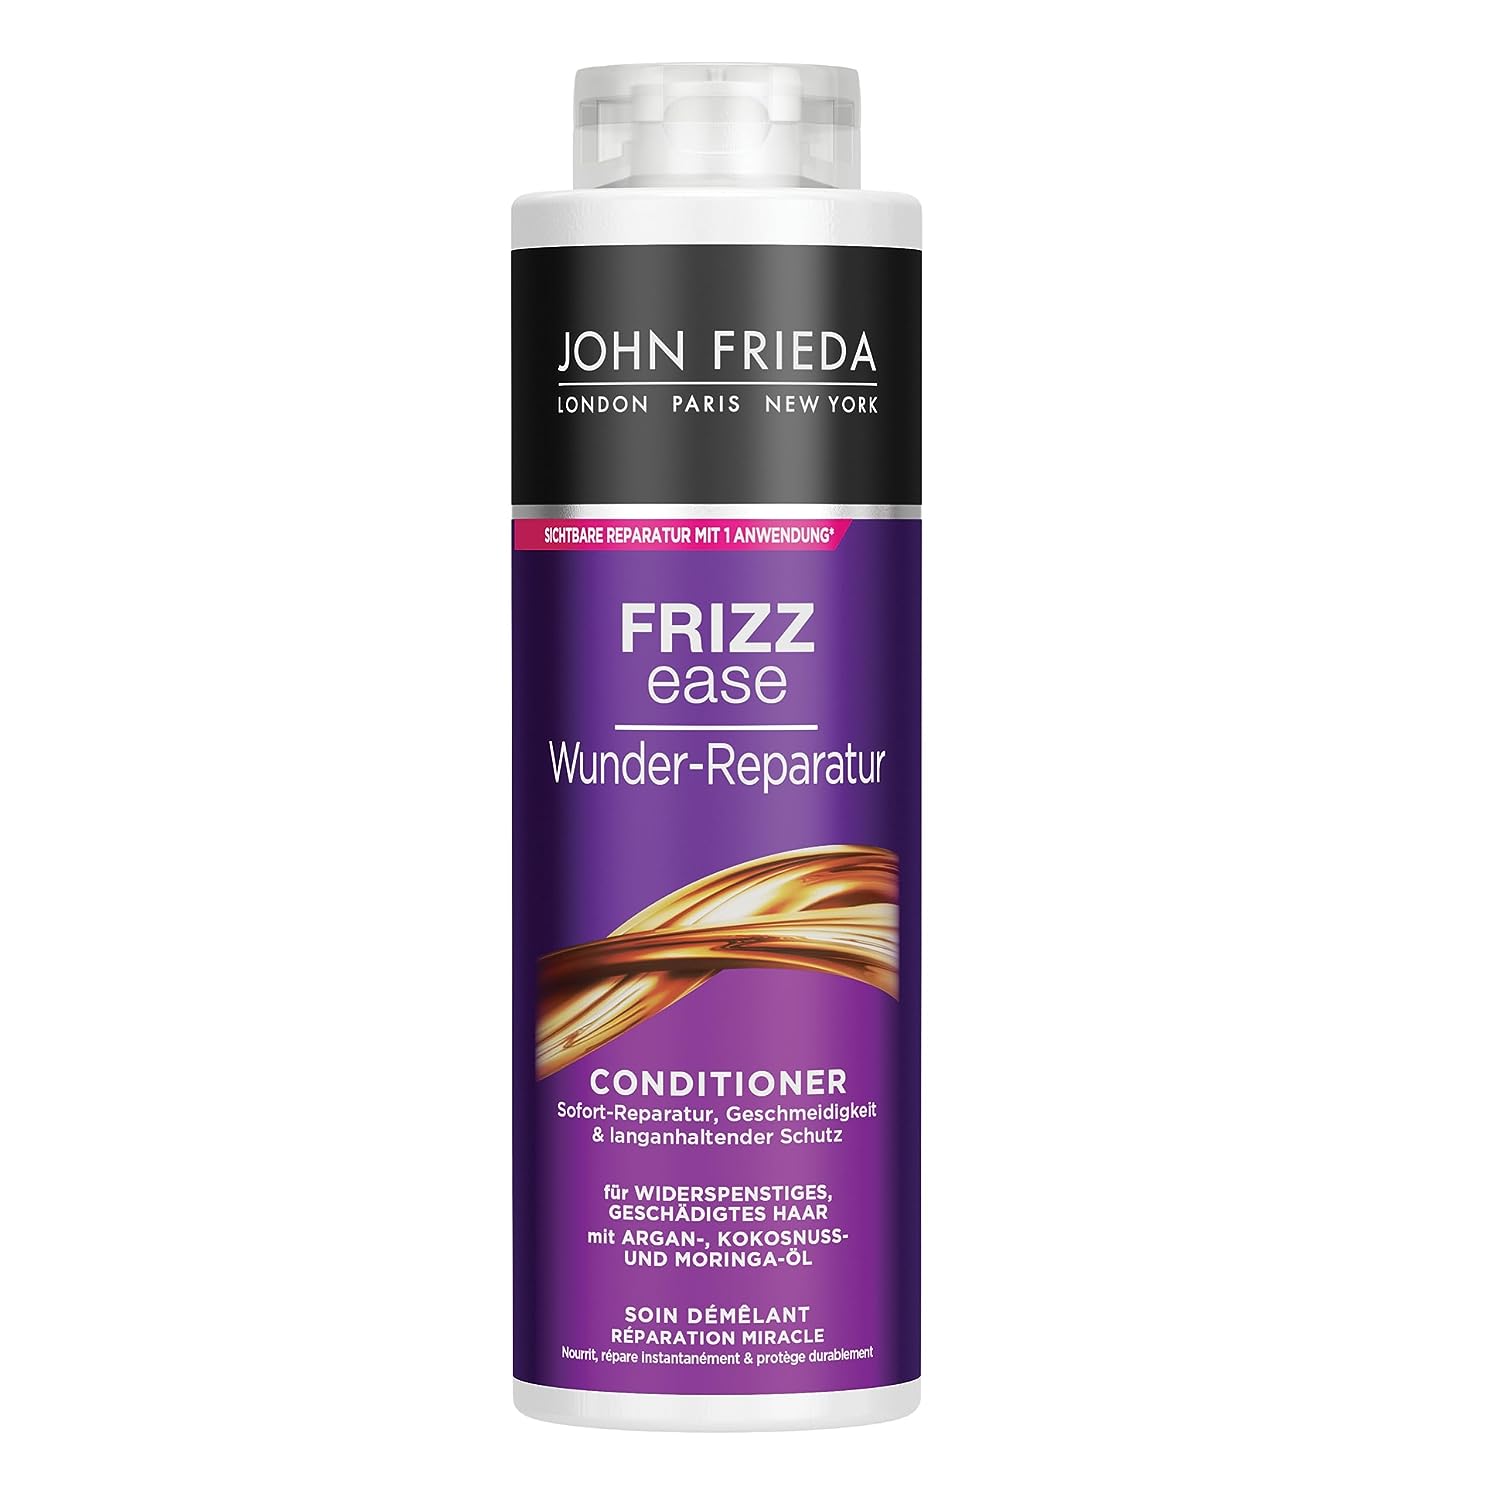 John Frieda Miracle Repair Conditioner - Value Size: 500 ml - Frizz Ease Series - Hair Type: Unruly, Damaged, Stressed - Cabinet Size